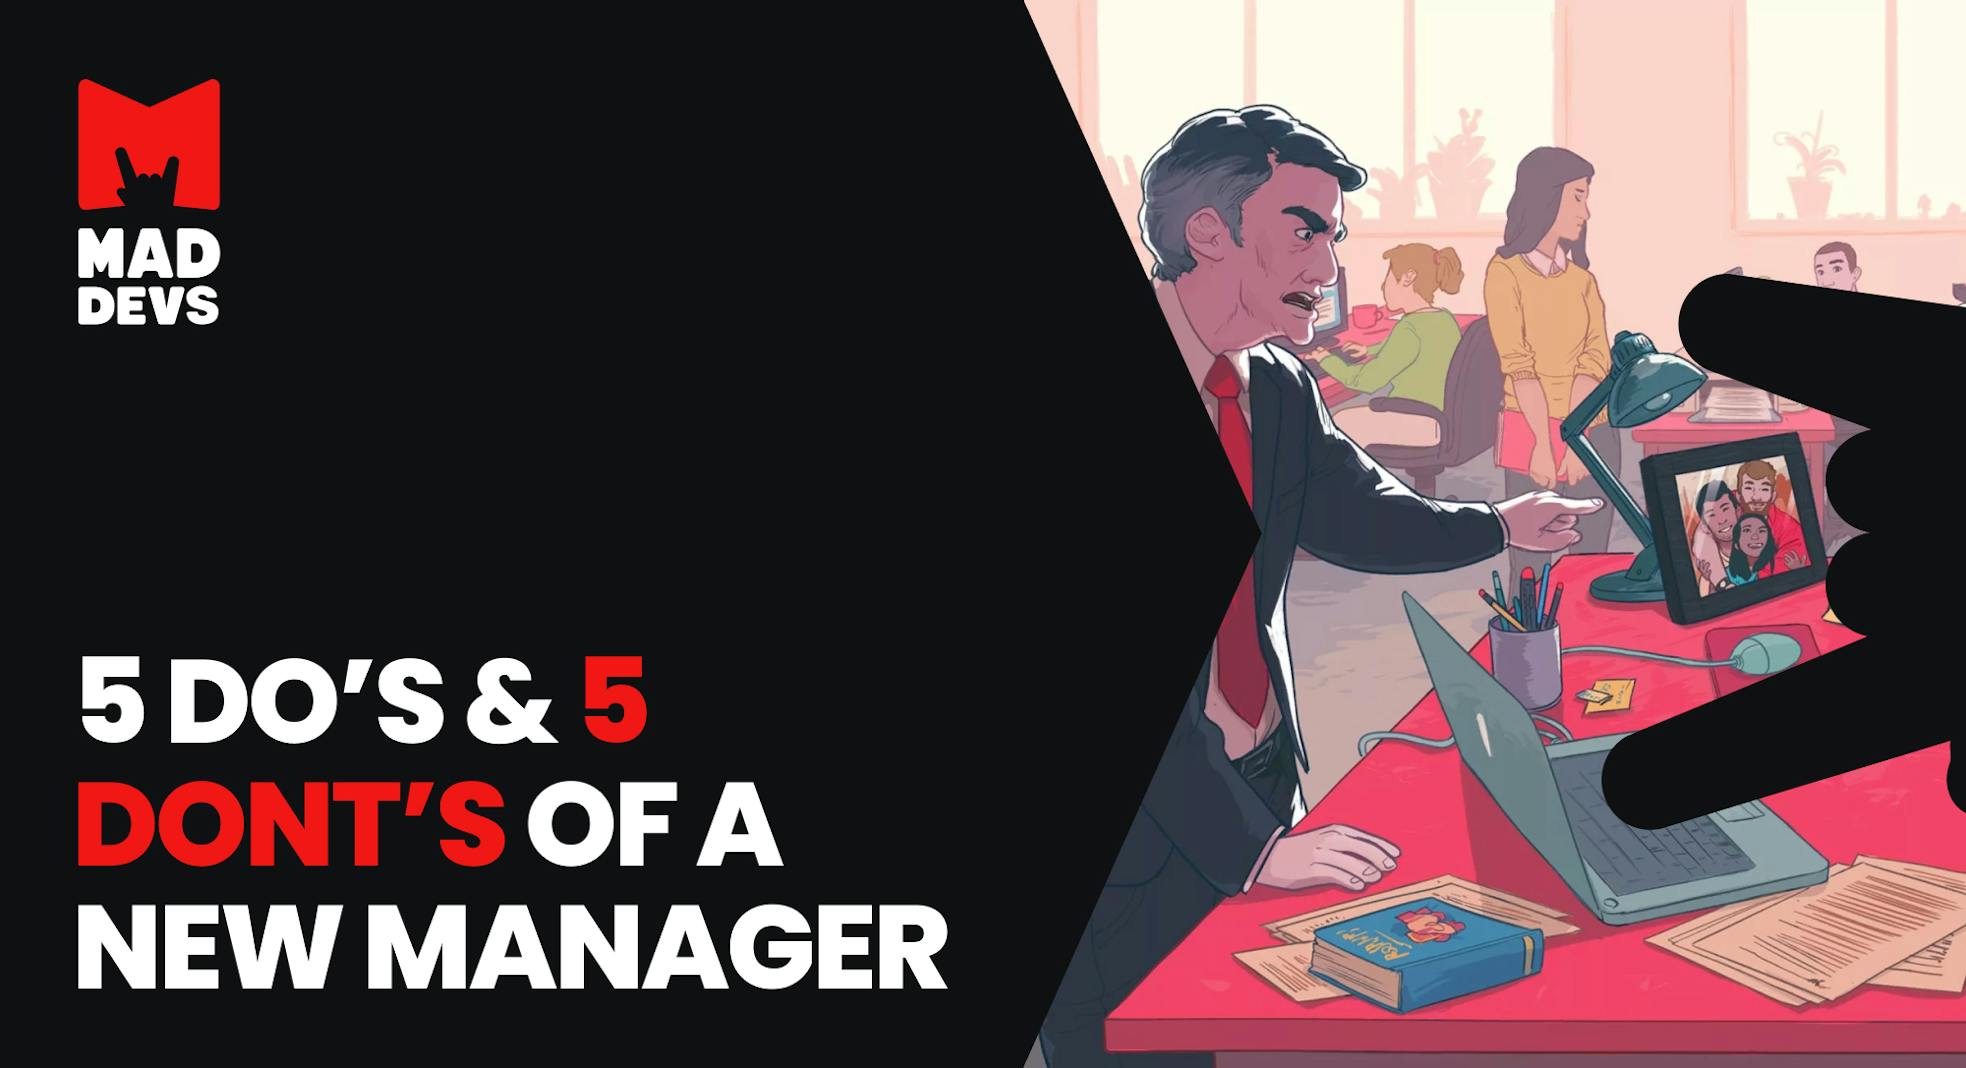 5 DOs & 5 DON’Ts of a New Manager